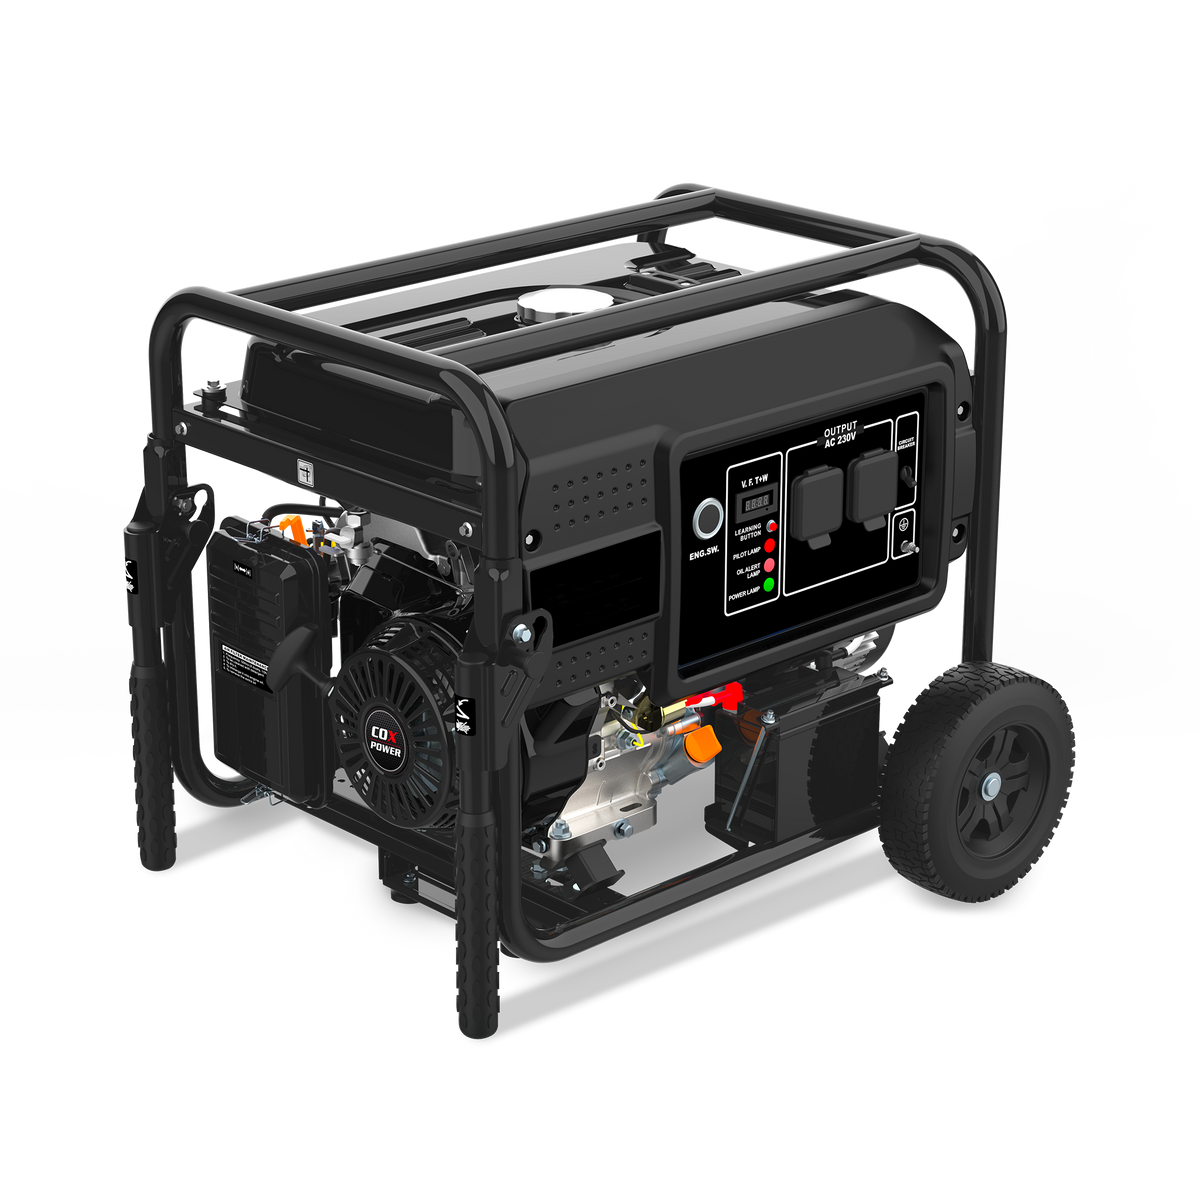 Product Image of a COX Power 8.5kw Electric Start Generator